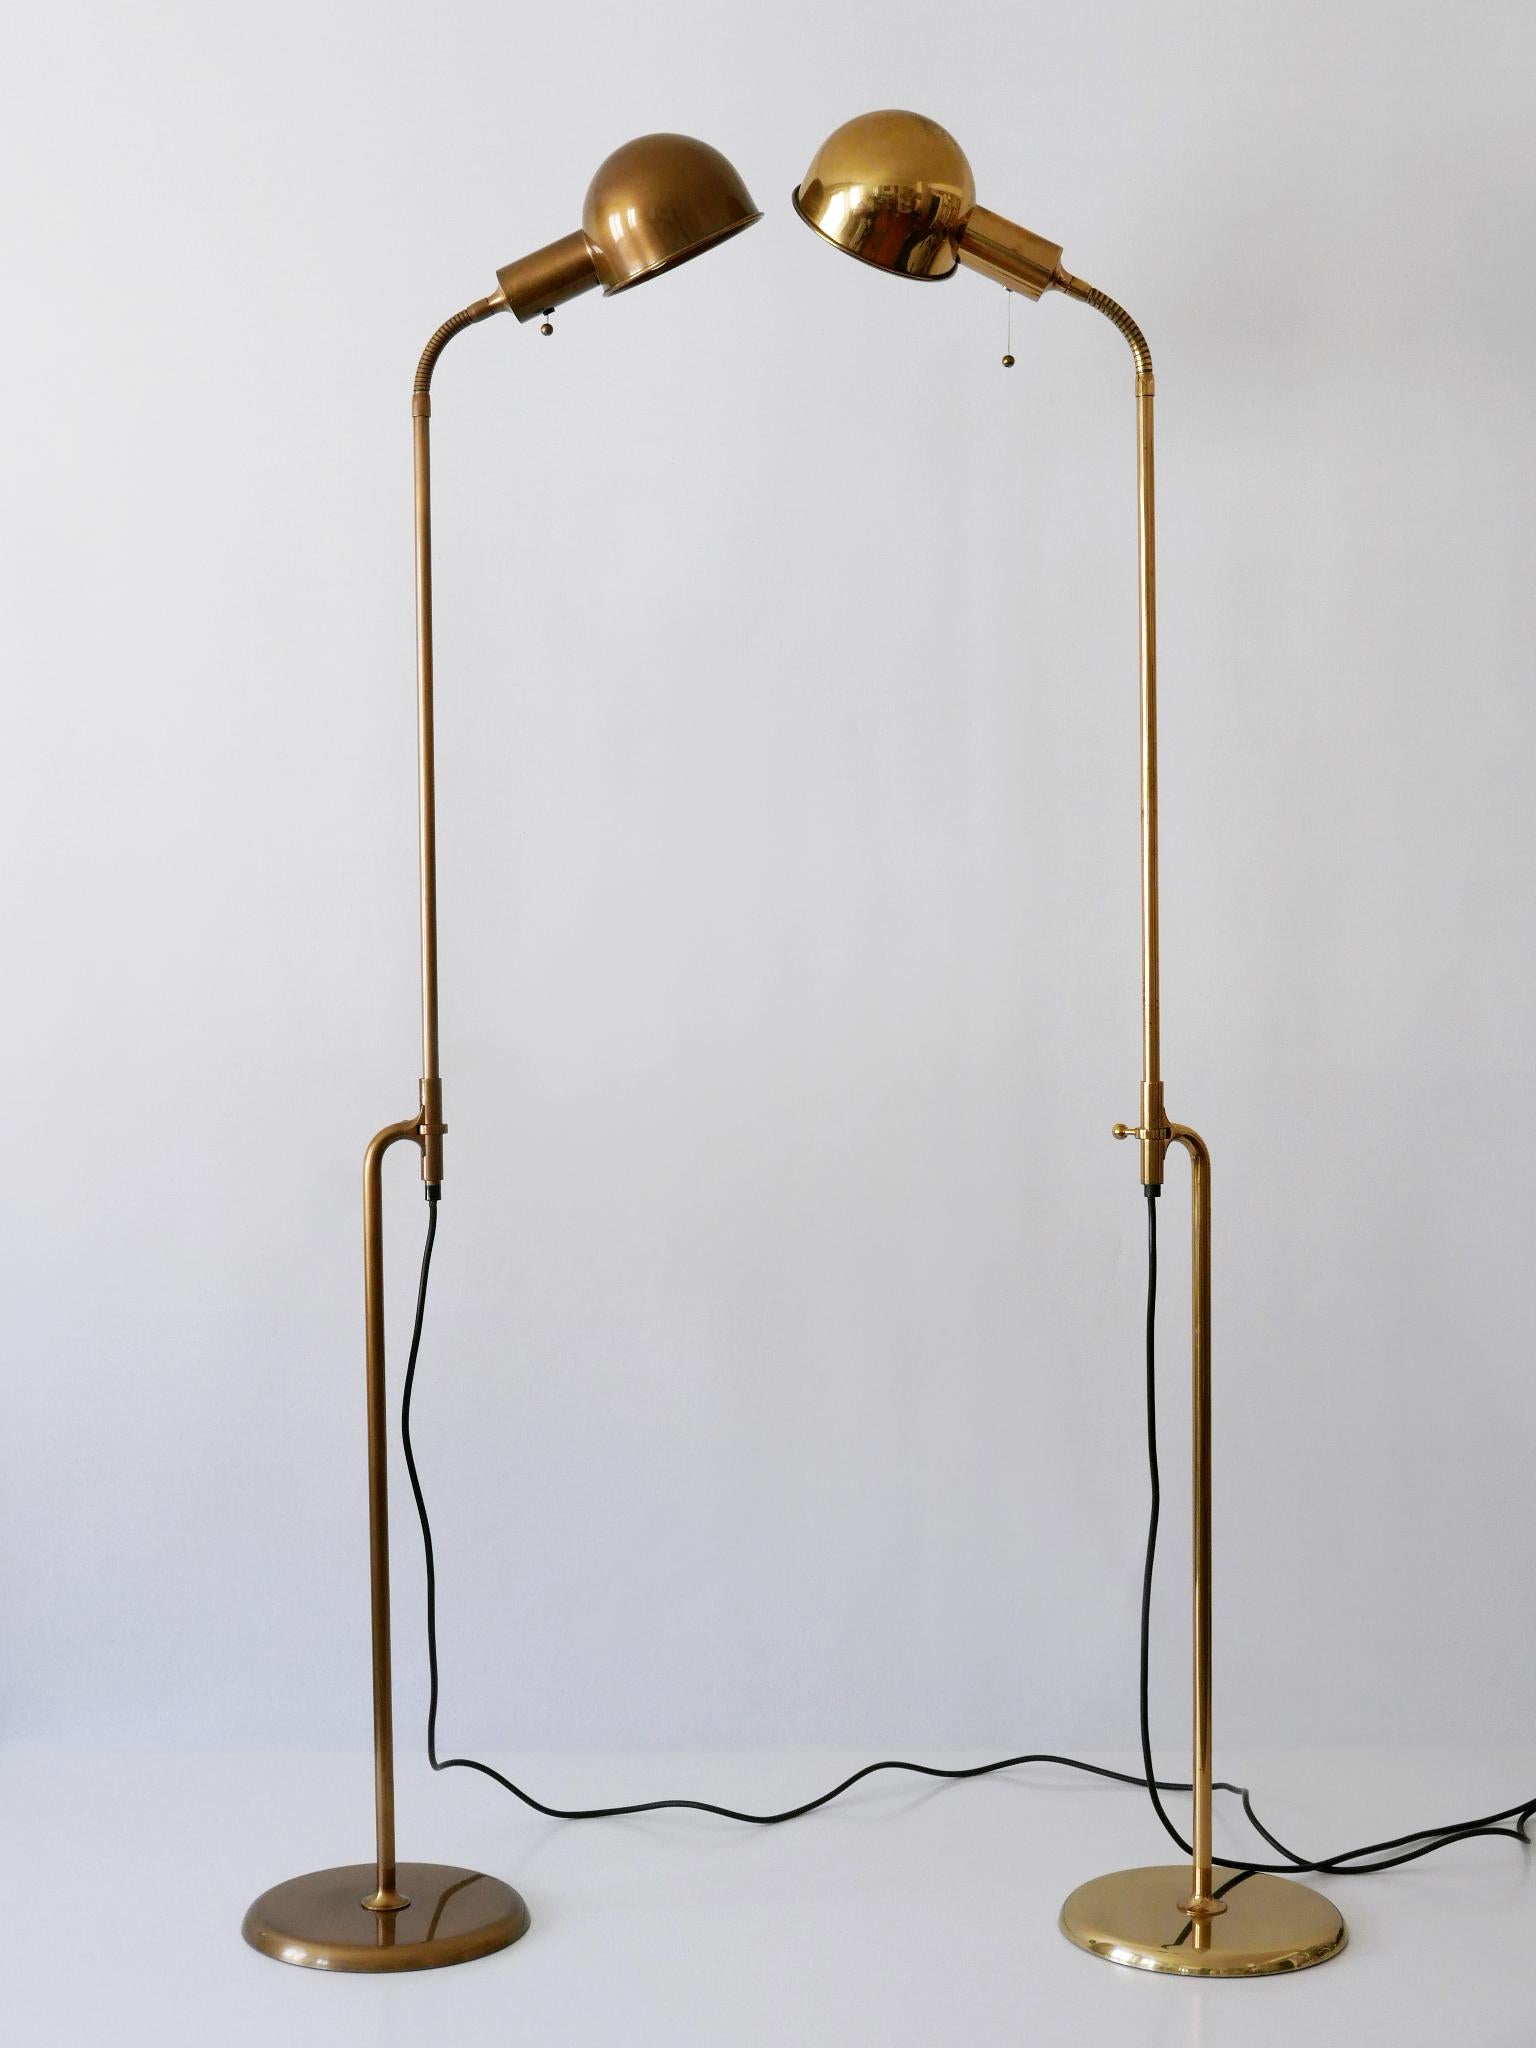 German Set of Two Mid-Century Modern Reading Floor Lamps 'Bola' by Florian Schulz 1970s For Sale